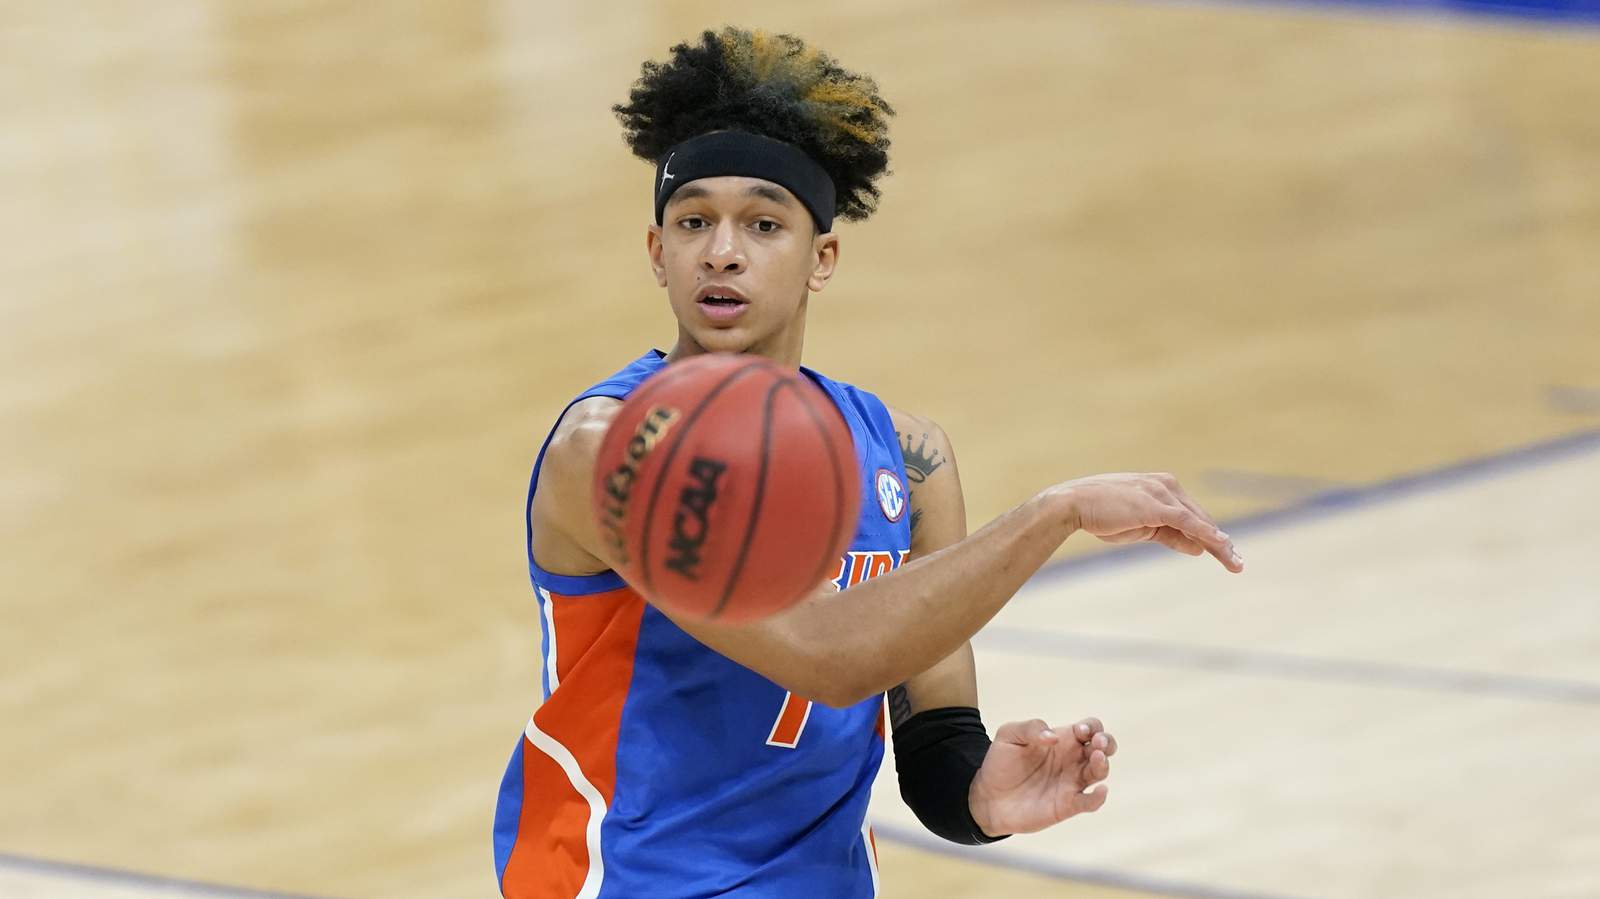 Playmaker Tre Mann declares for NBA, says goodbye to Florida